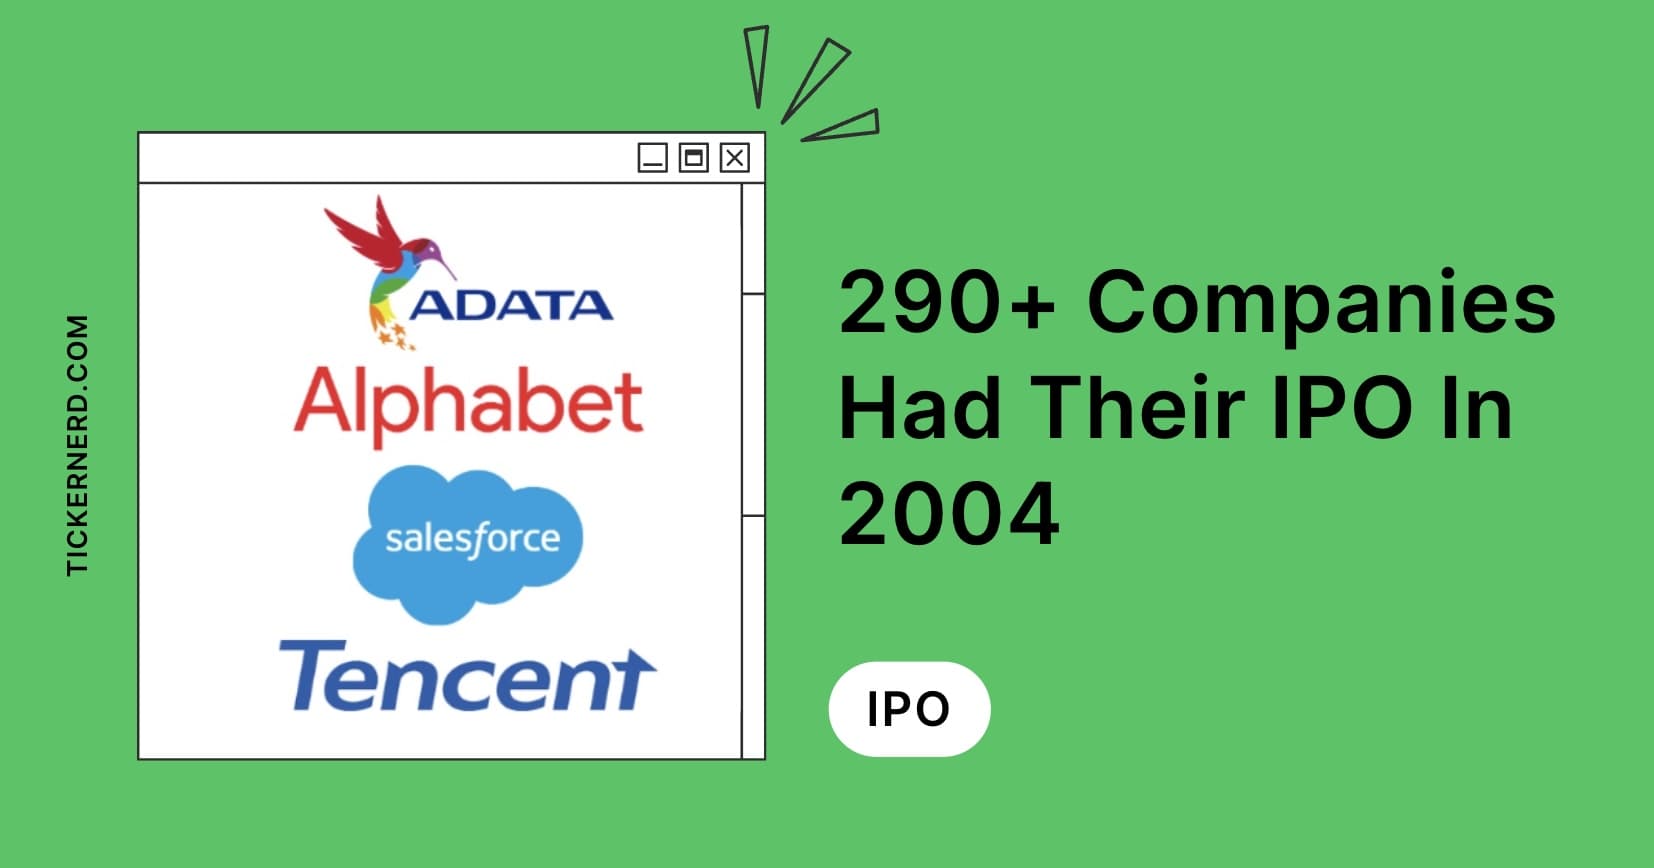 companies that had their ipo in 2004